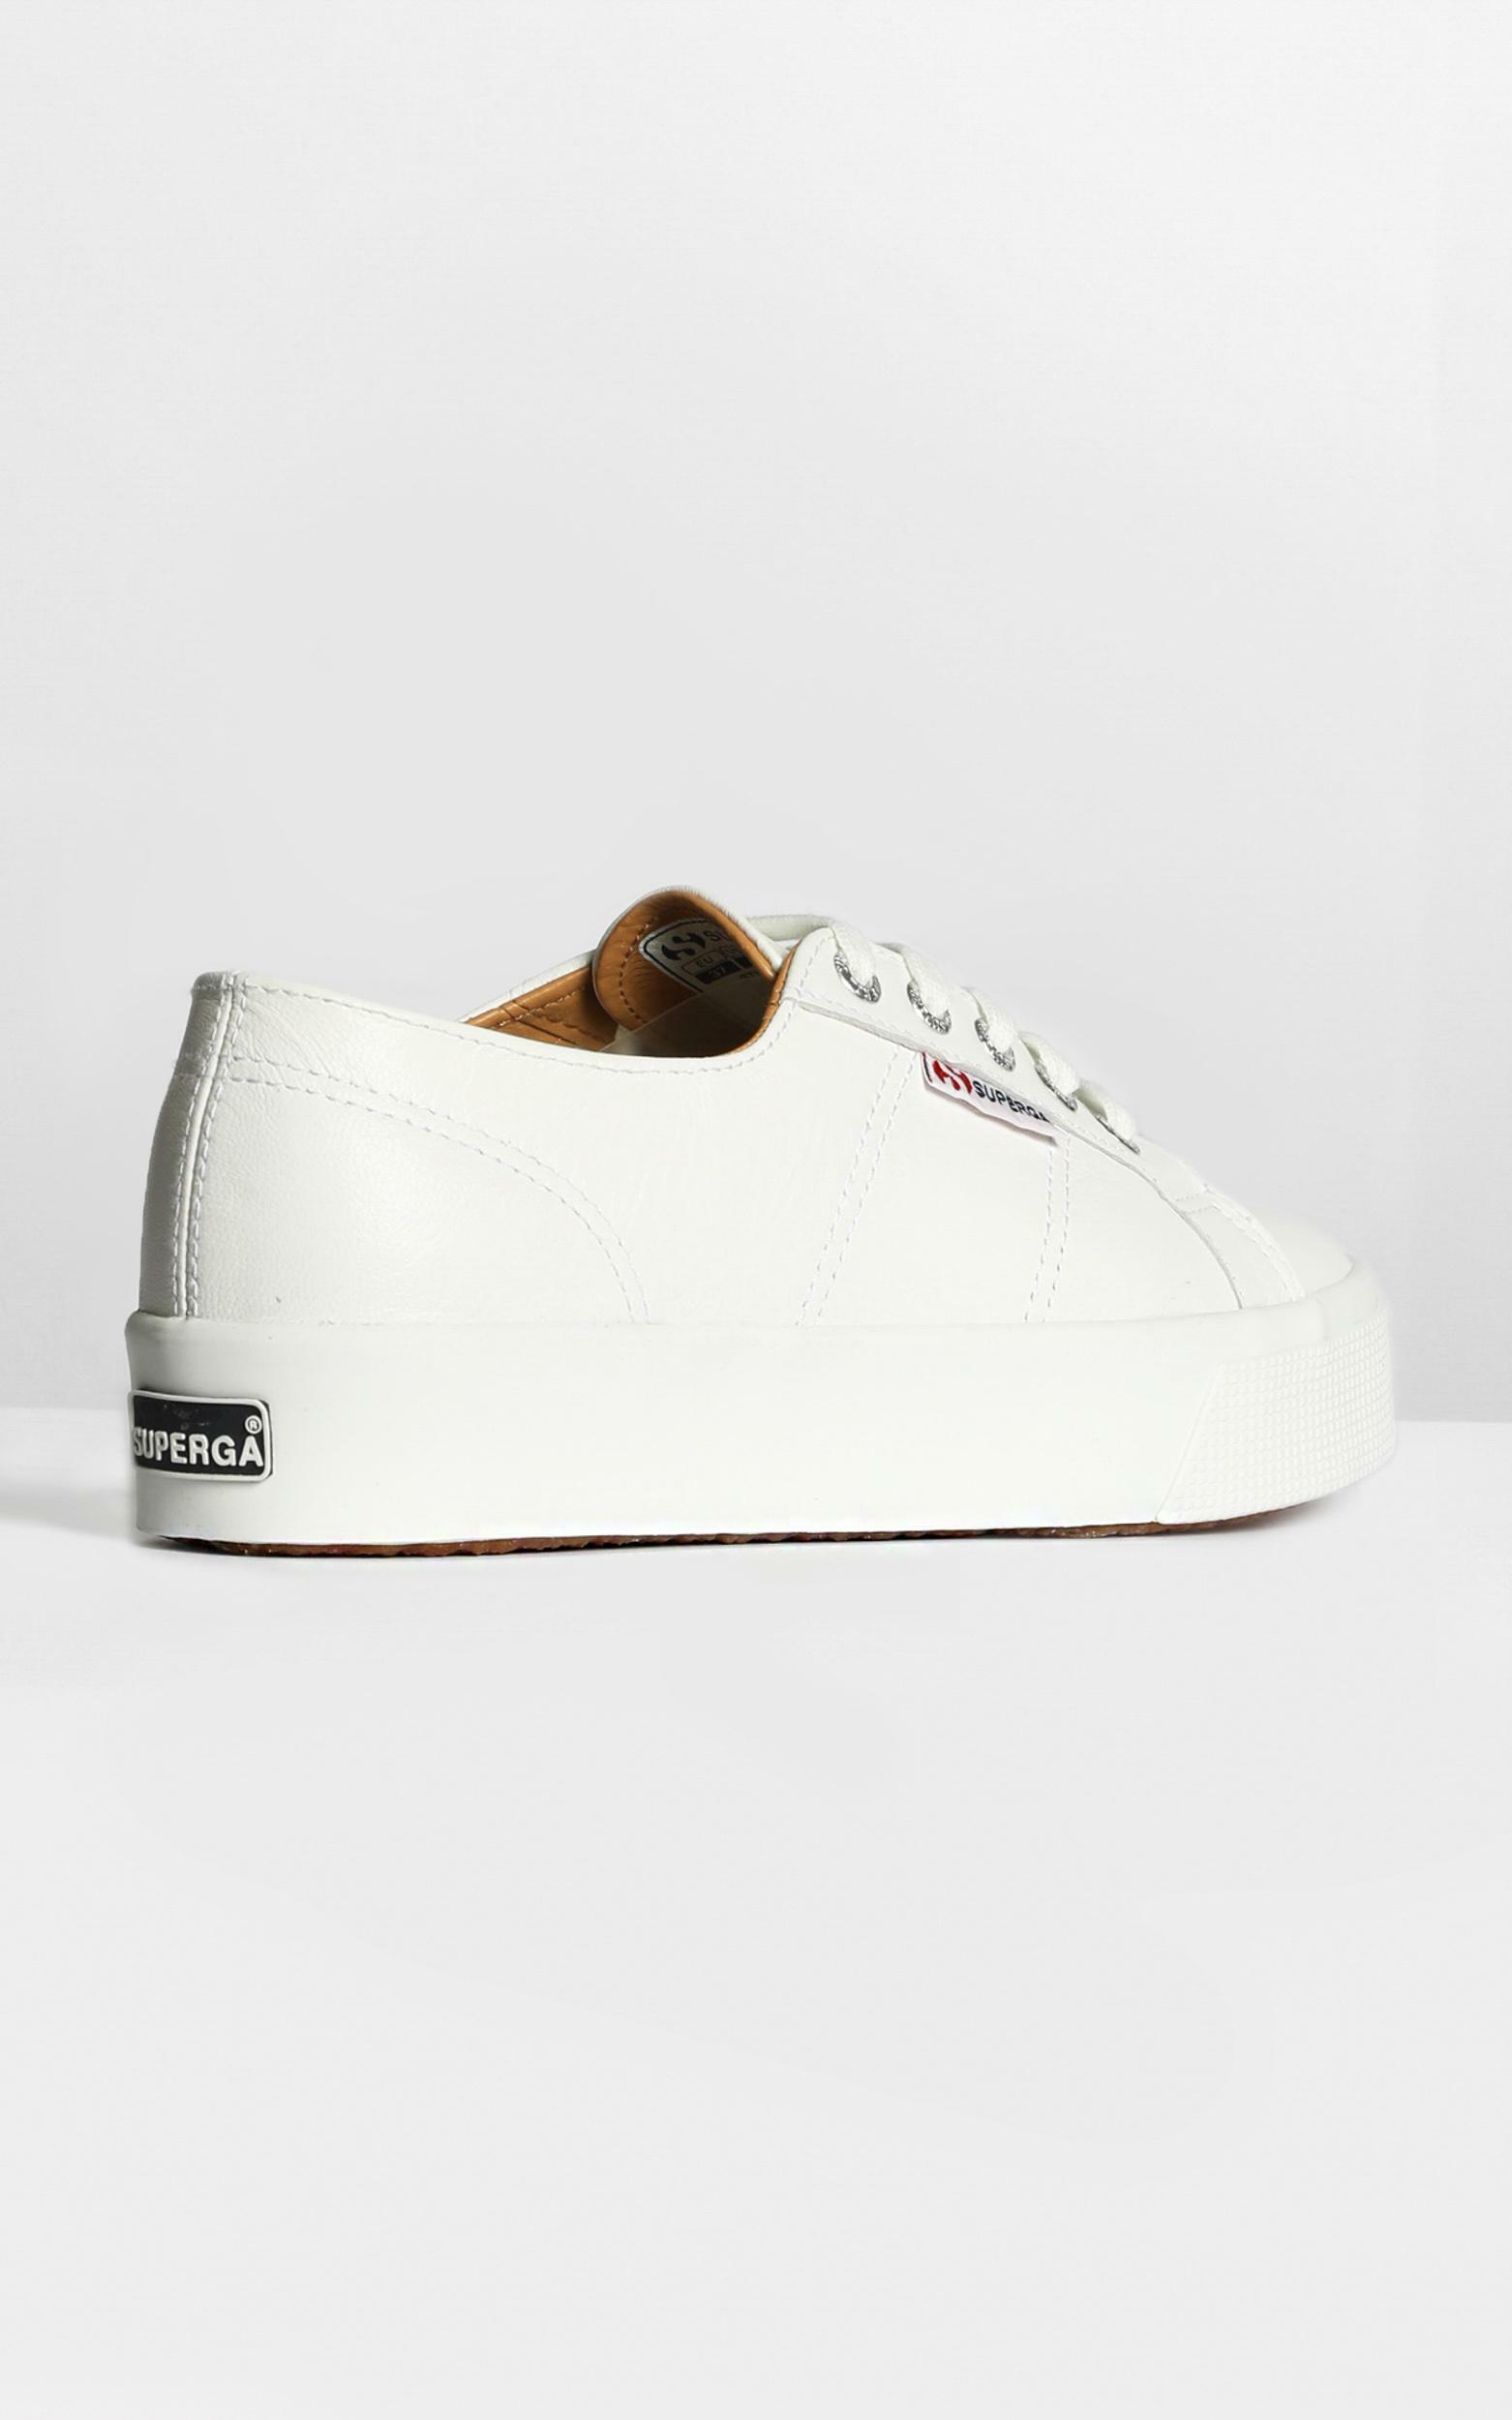 Superga - 2730 Nappaleau Sneakers in White Leather - 06, WHT1, hi-res image number null